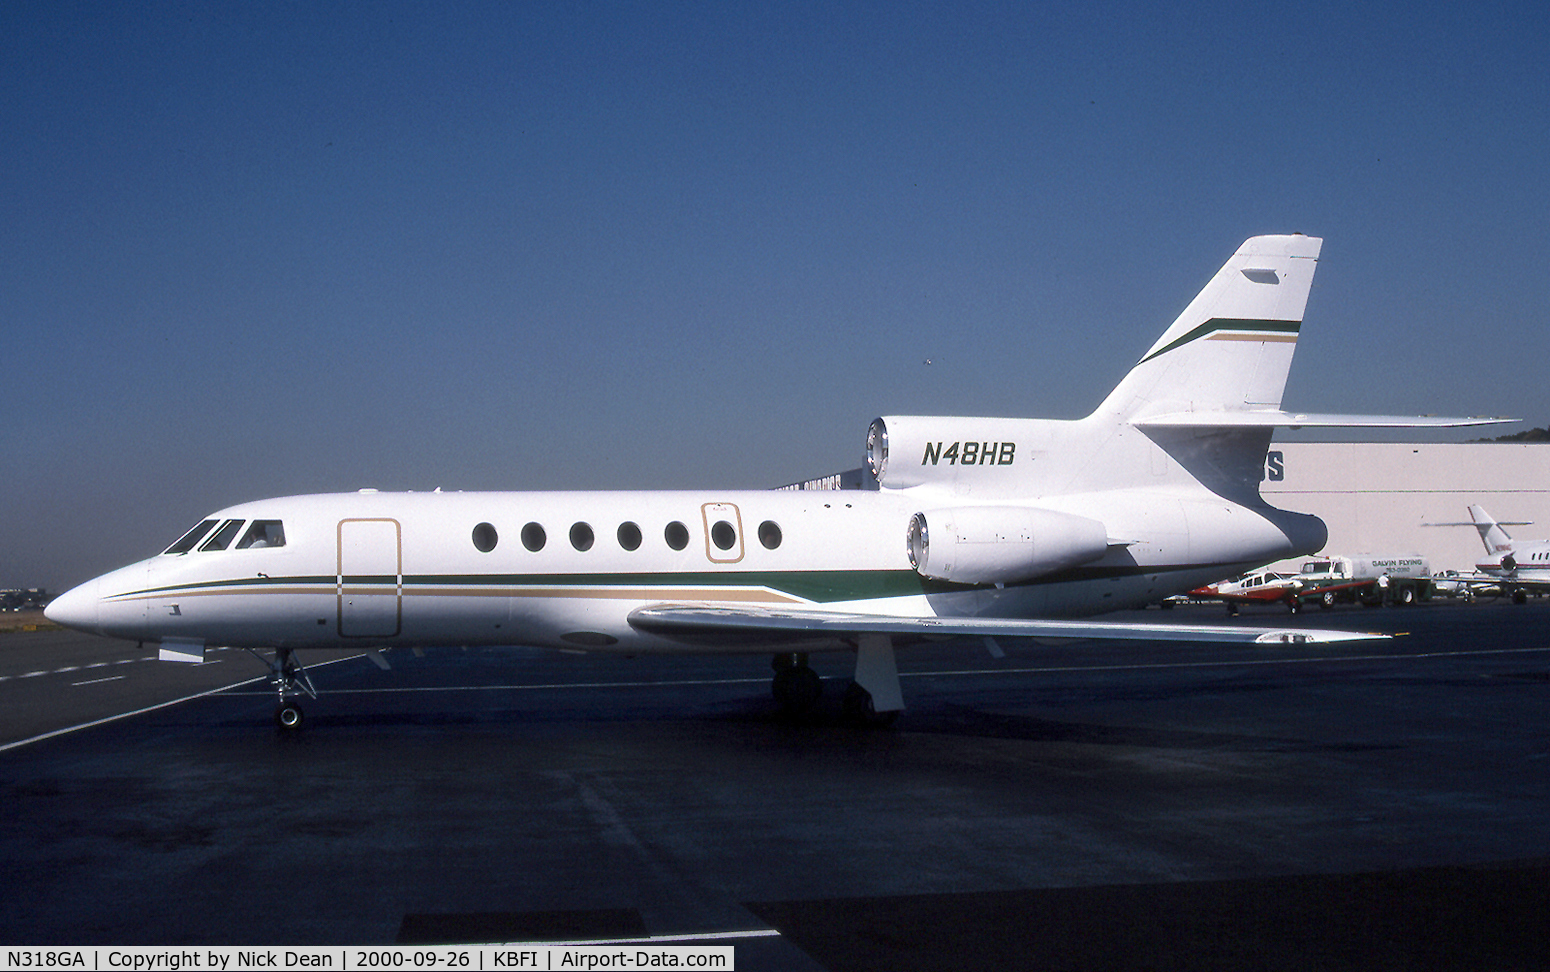 N318GA, 1992 Dassault Falcon 50 C/N 233, Seen here as N48HB this airframe is currently registered N318GA as posted